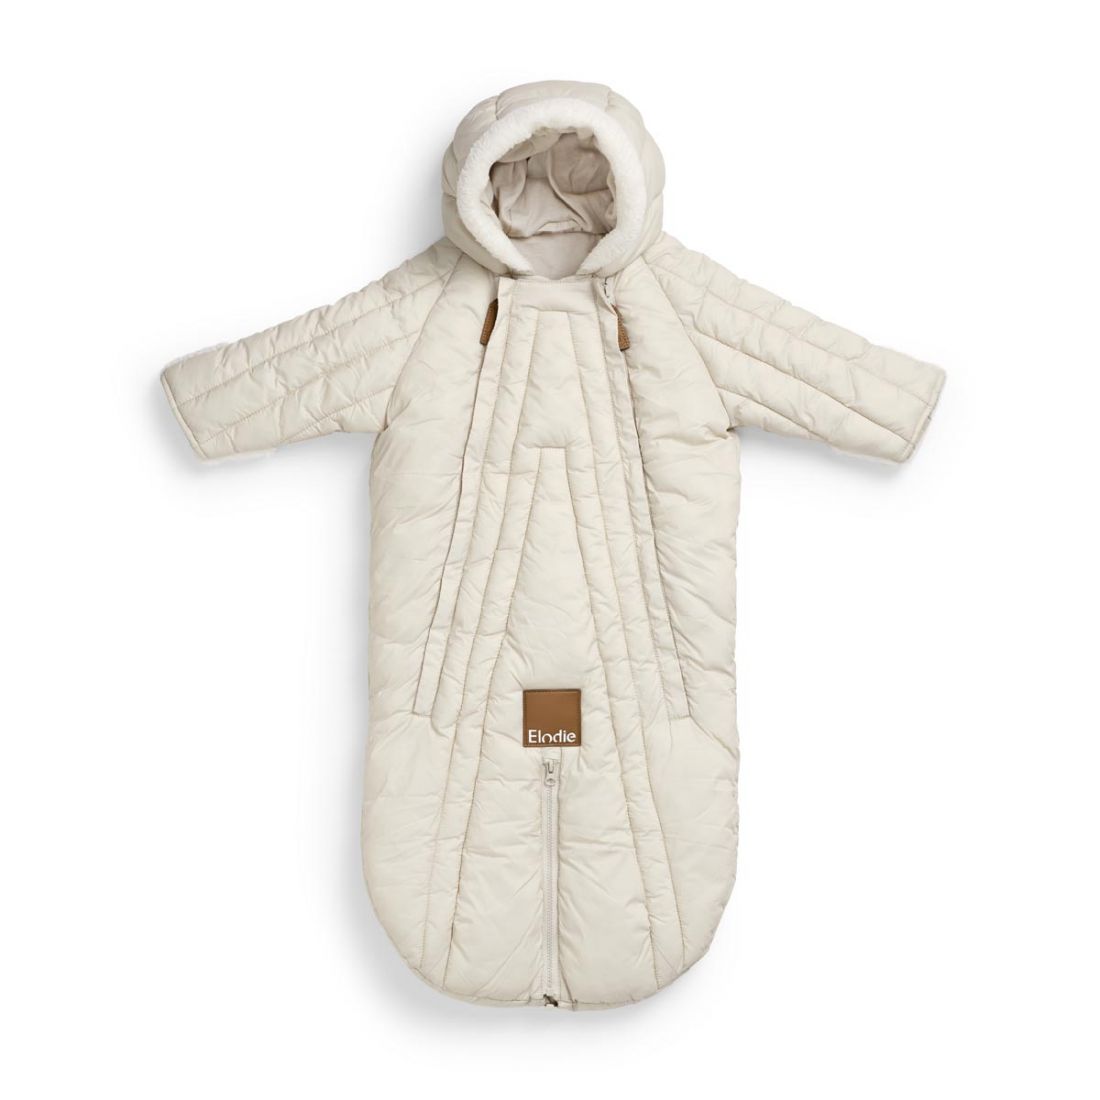 Elodie Baby Overall 0-6m Creamy White